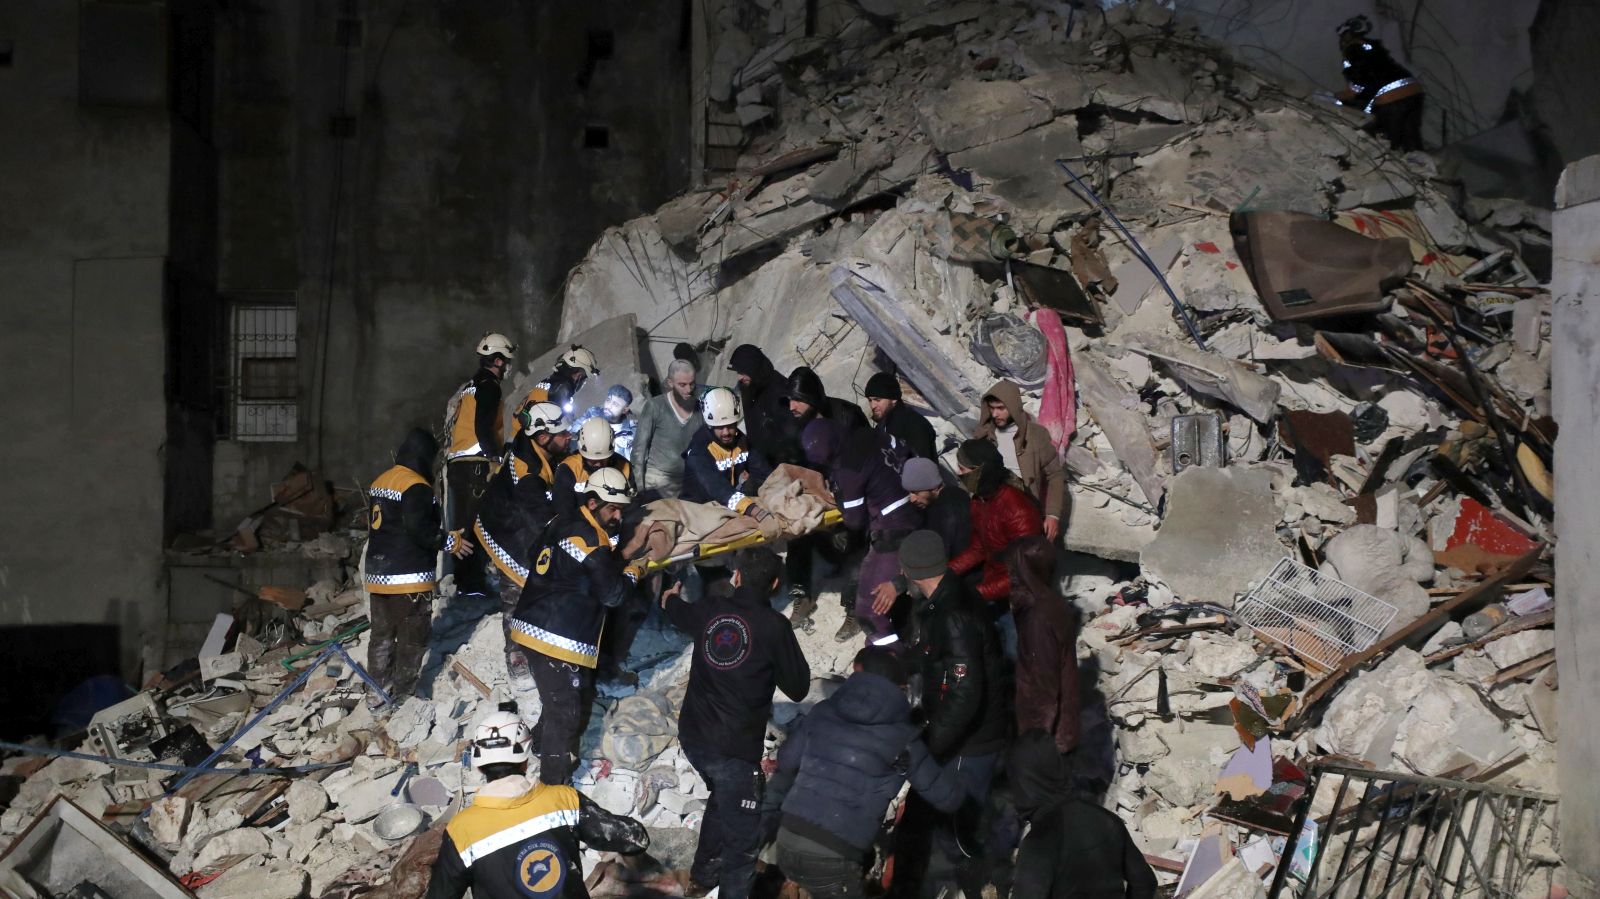 epa10450683 Rescuers search the rubble of a building for survivors following an earthquake in Idlib province, Syria 06 February 2023. According to the US Geological Service, an earthquake with a preliminary magnitude of 7.8 struck southern Turkey close to the Syrian border, causing buildings to collapse and sending shockwaves over northwest Syria, Cyprus, and Lebanon. At least 221 people were killed and 419 injured in northwest Syria, with hundreds remaining trapped under the rubble, according to the White Helmets group, the Syria Civil Defence operating in the area.  EPA/YAHYA NEMAH